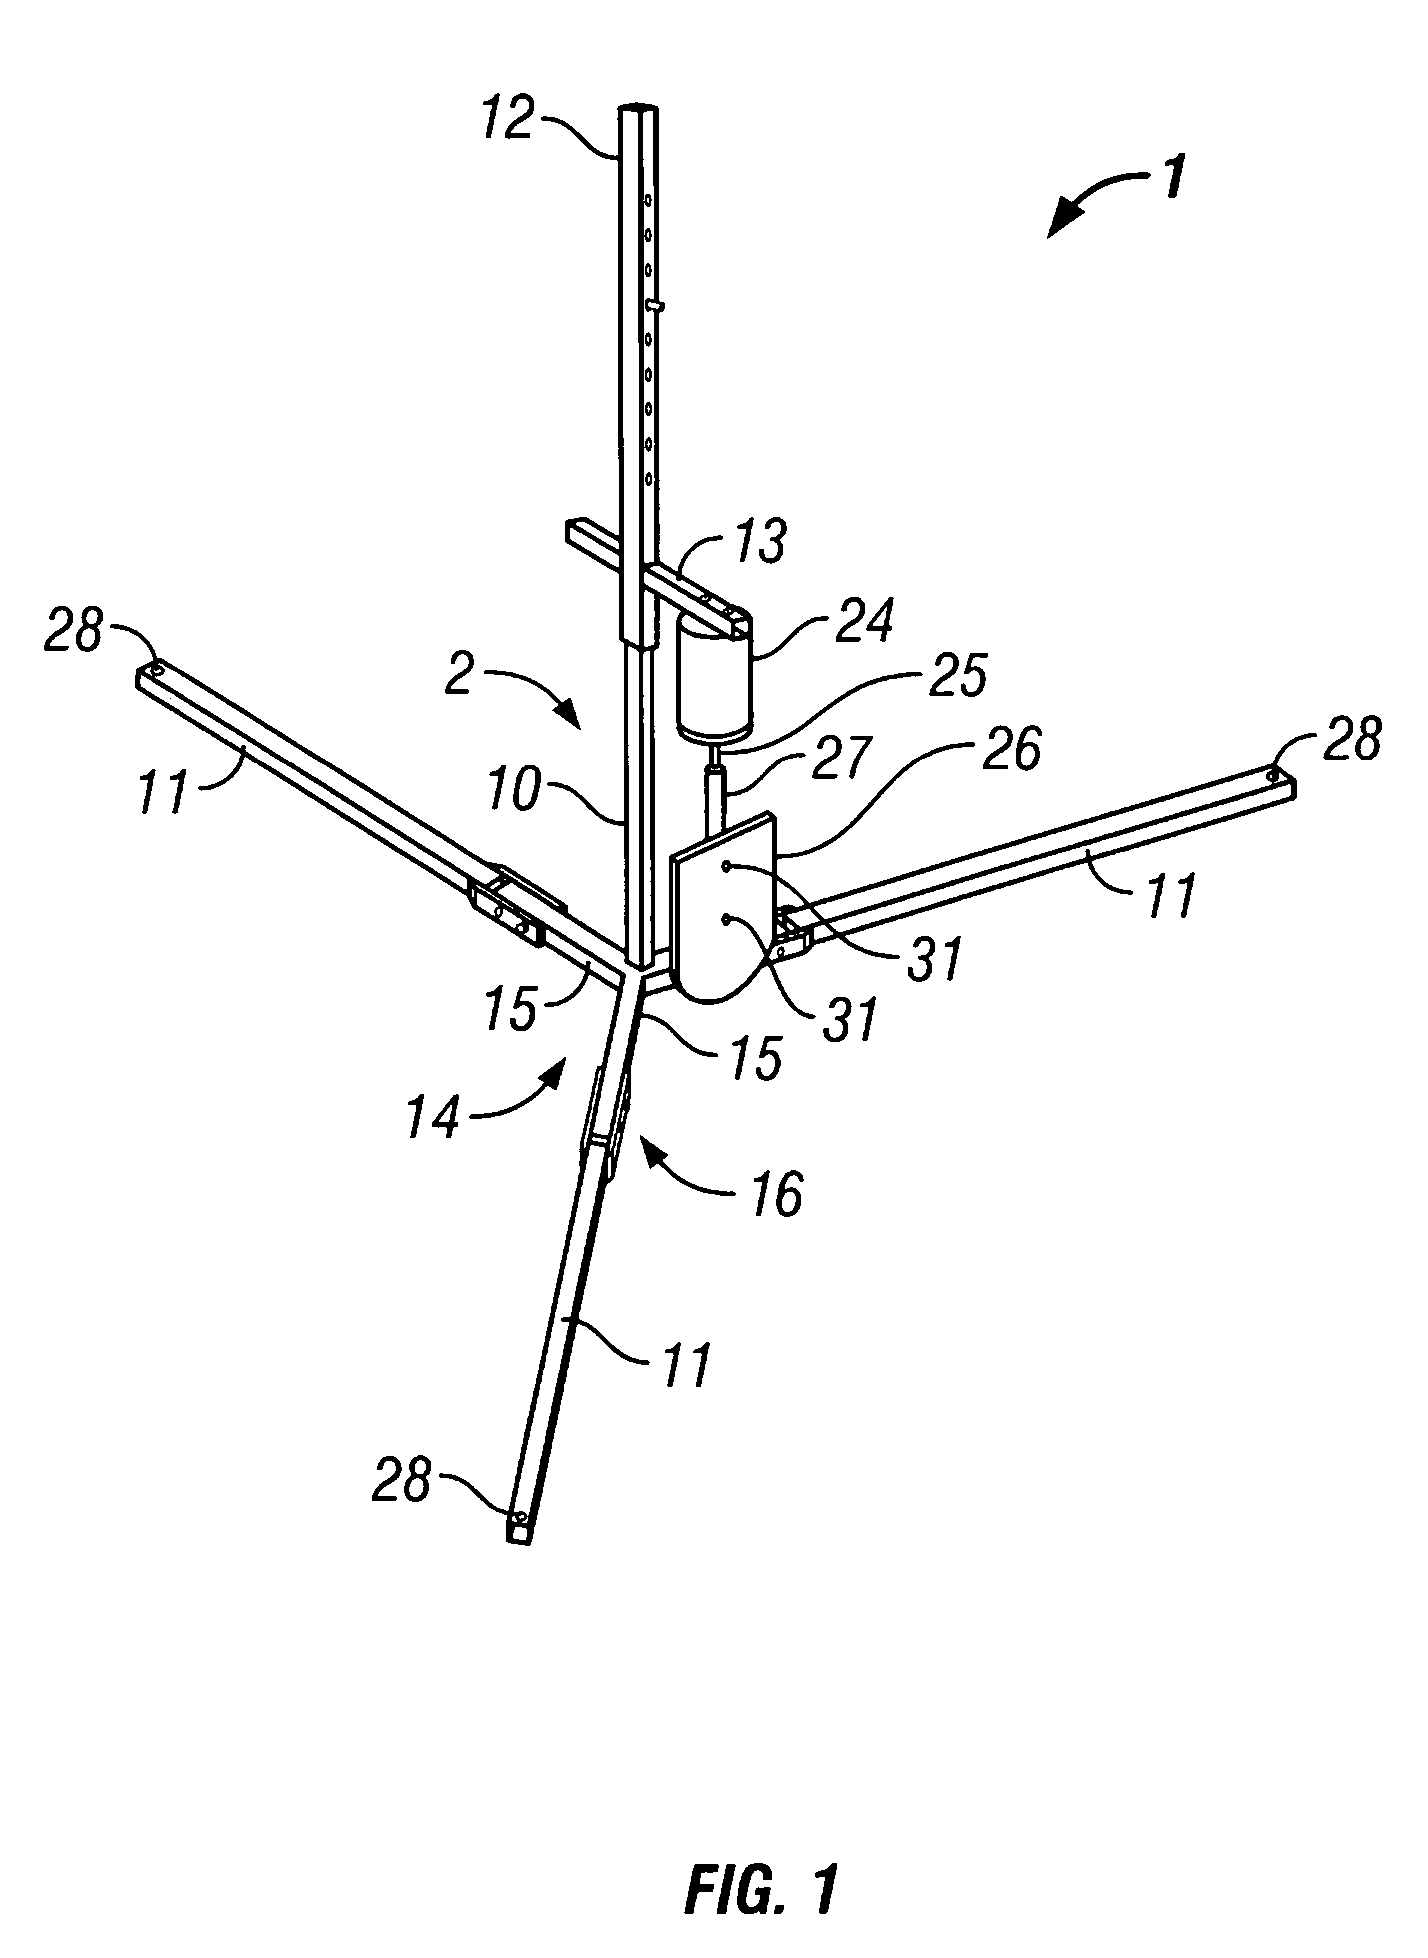 Wild game attraction device and method